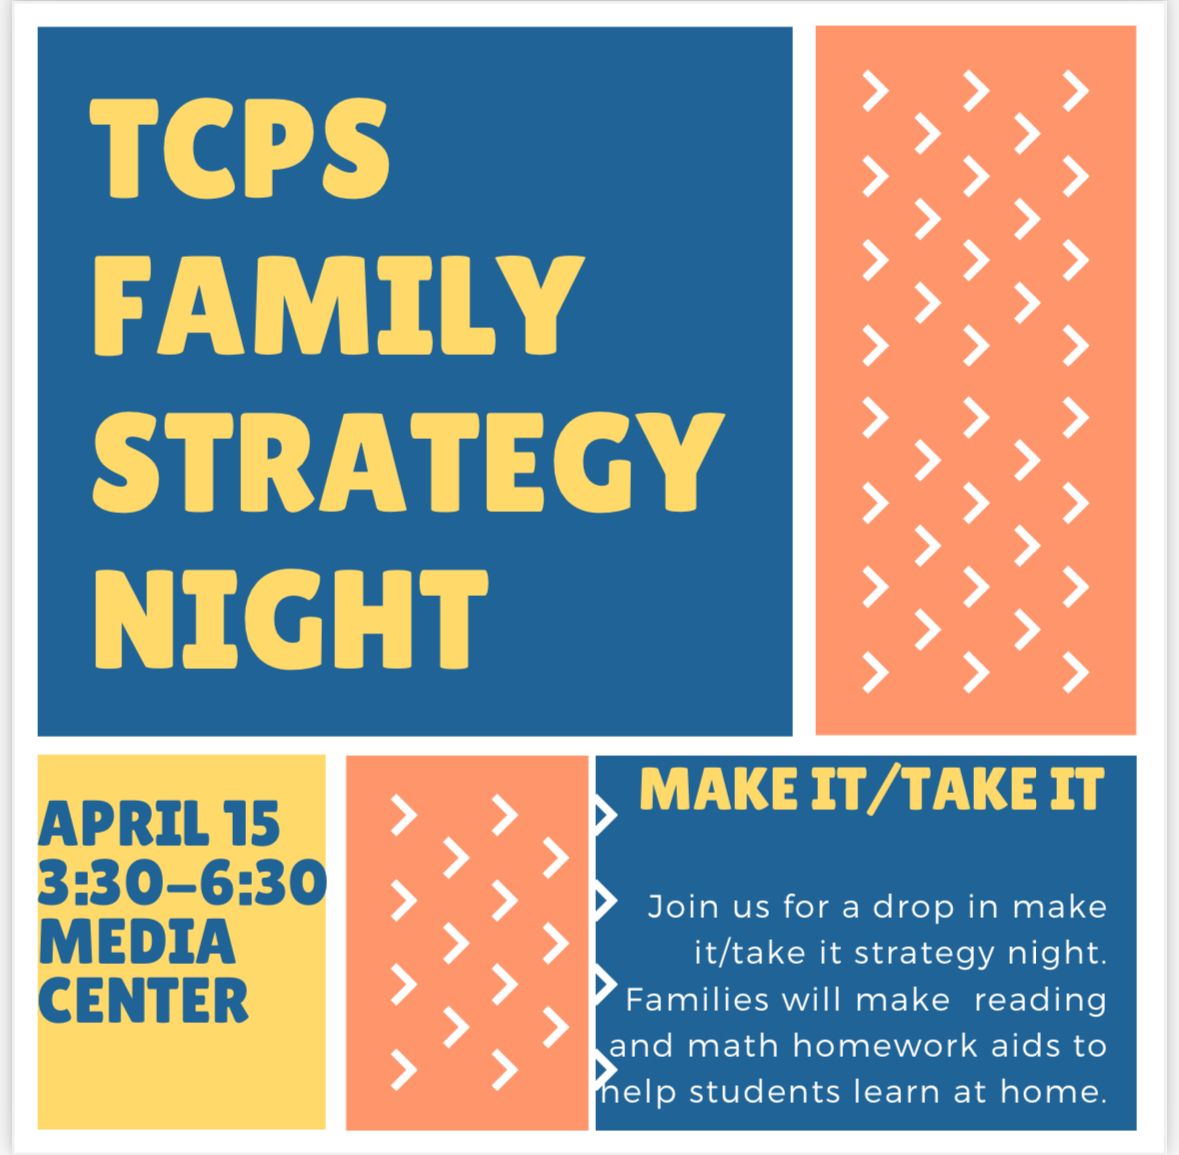 TCPS FAMILY STRATEGY NIGHT